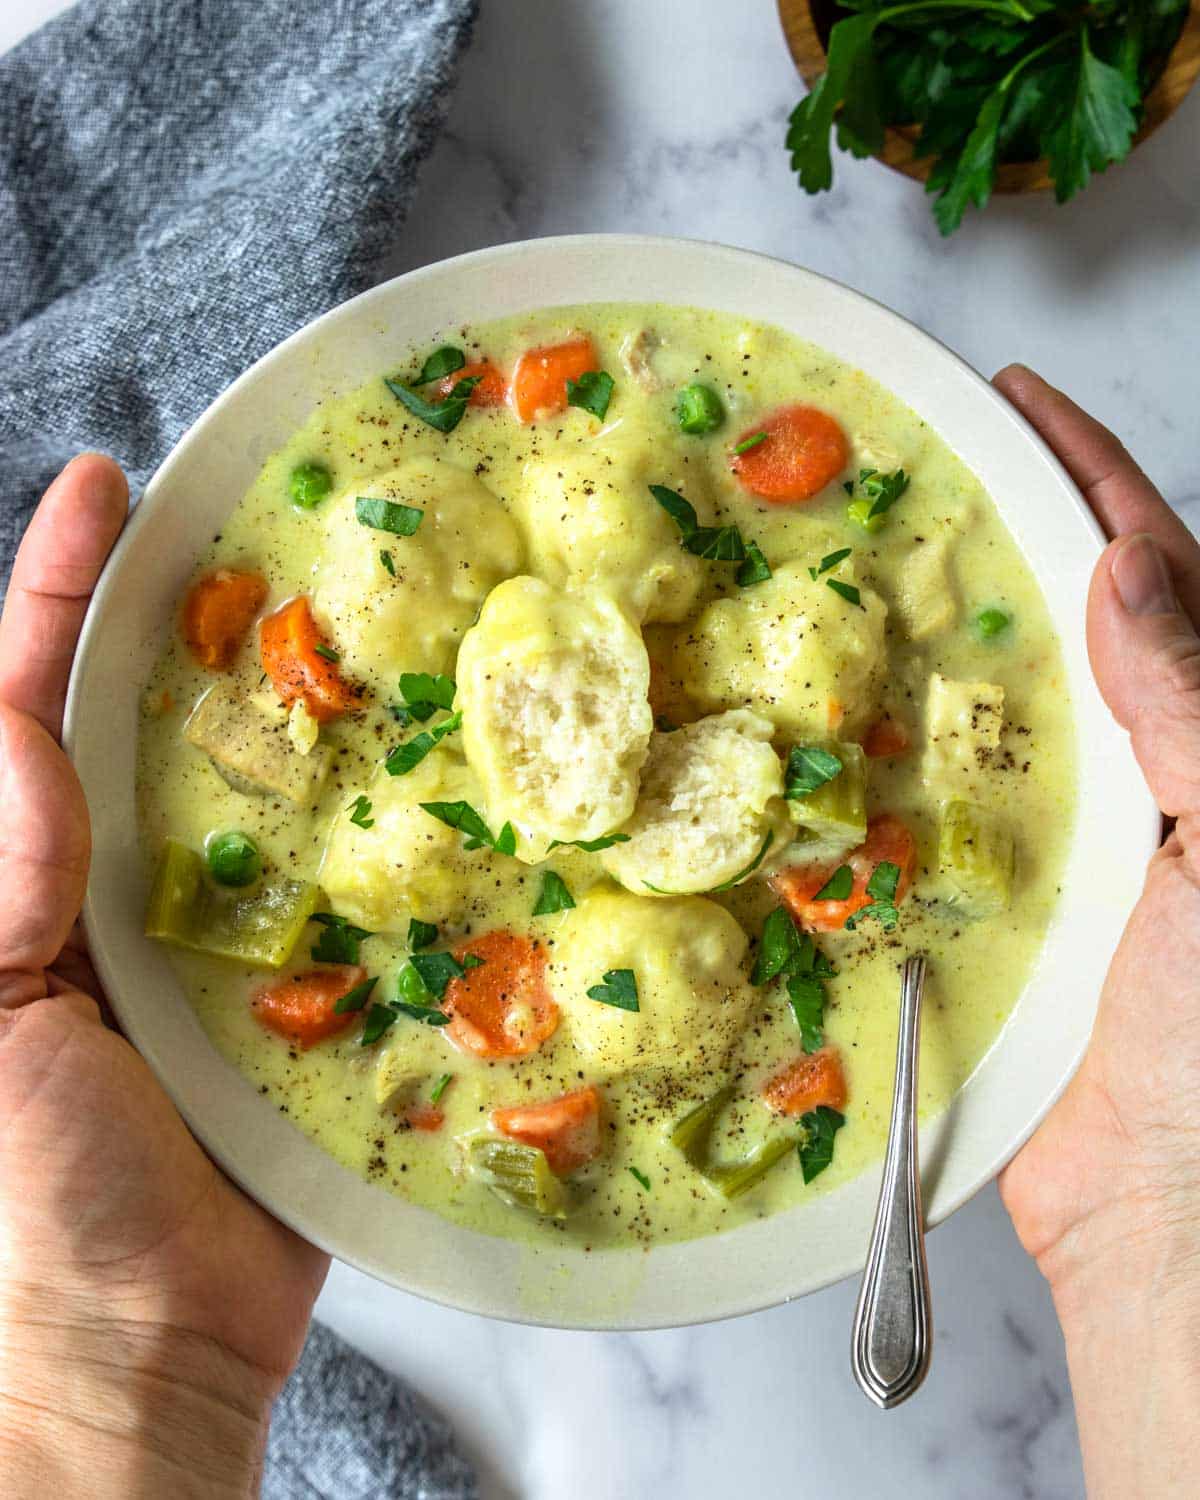 hands holding a bowl of chicken and dumplings